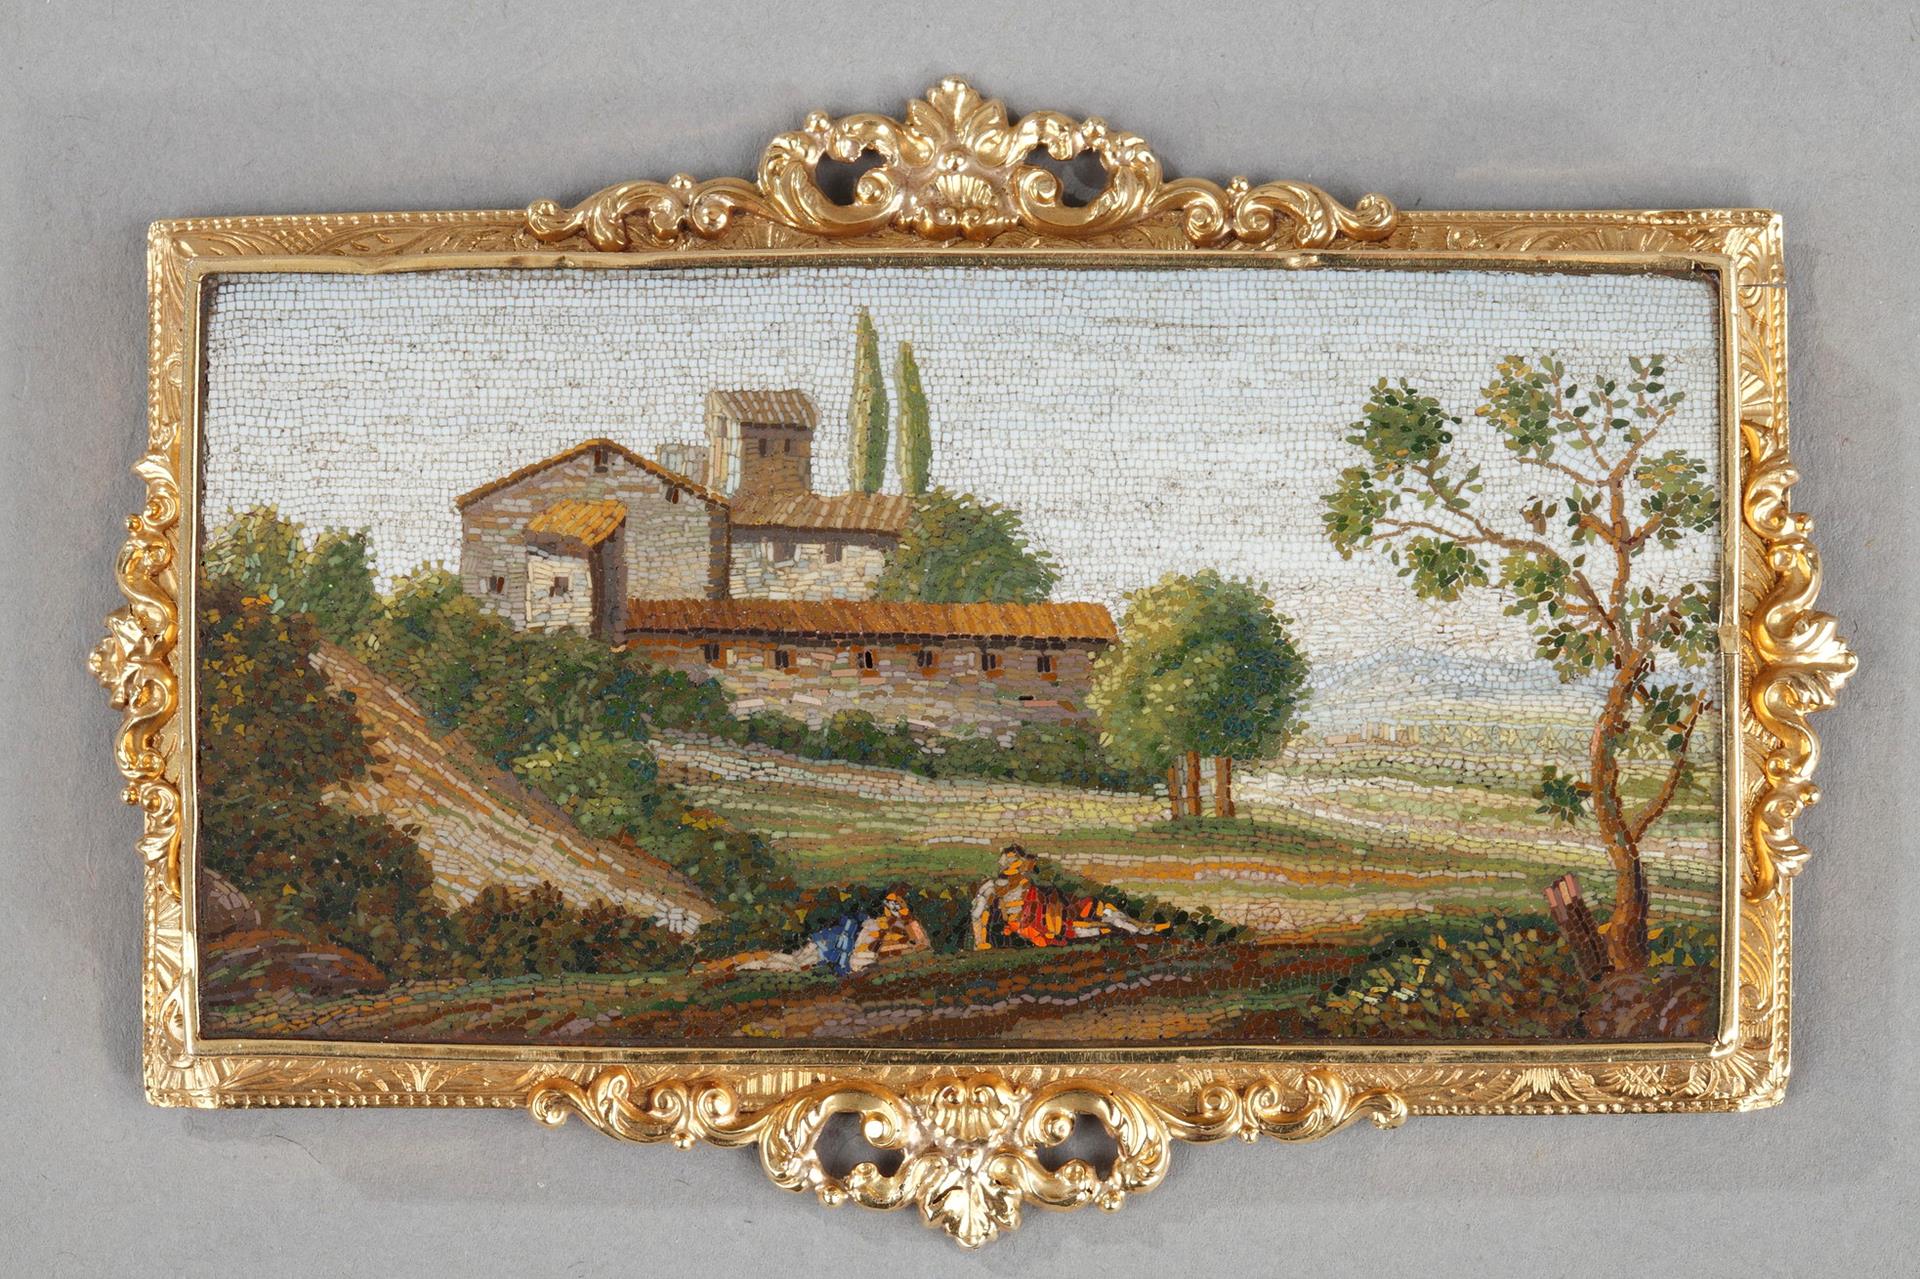 Micromosaic Plate with Arcadian landscape.
Early 19th Century.